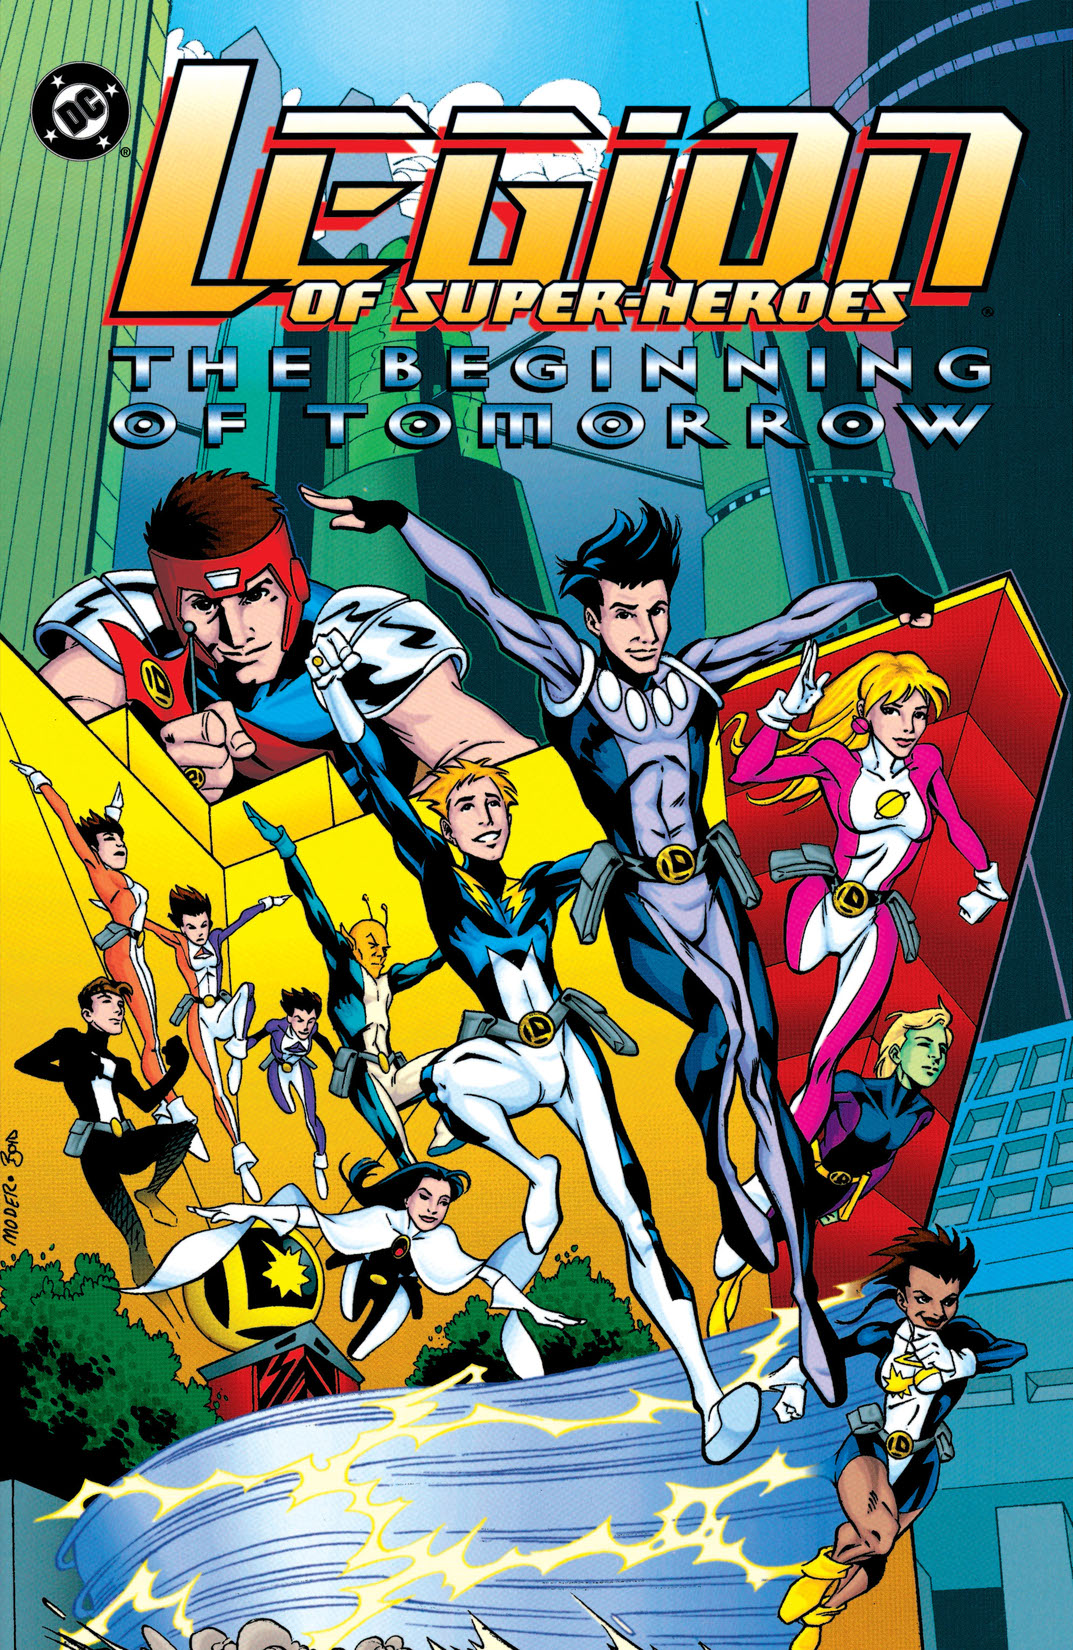 Legion of Super-Heroes: The Beginning of Tomorrow preview images